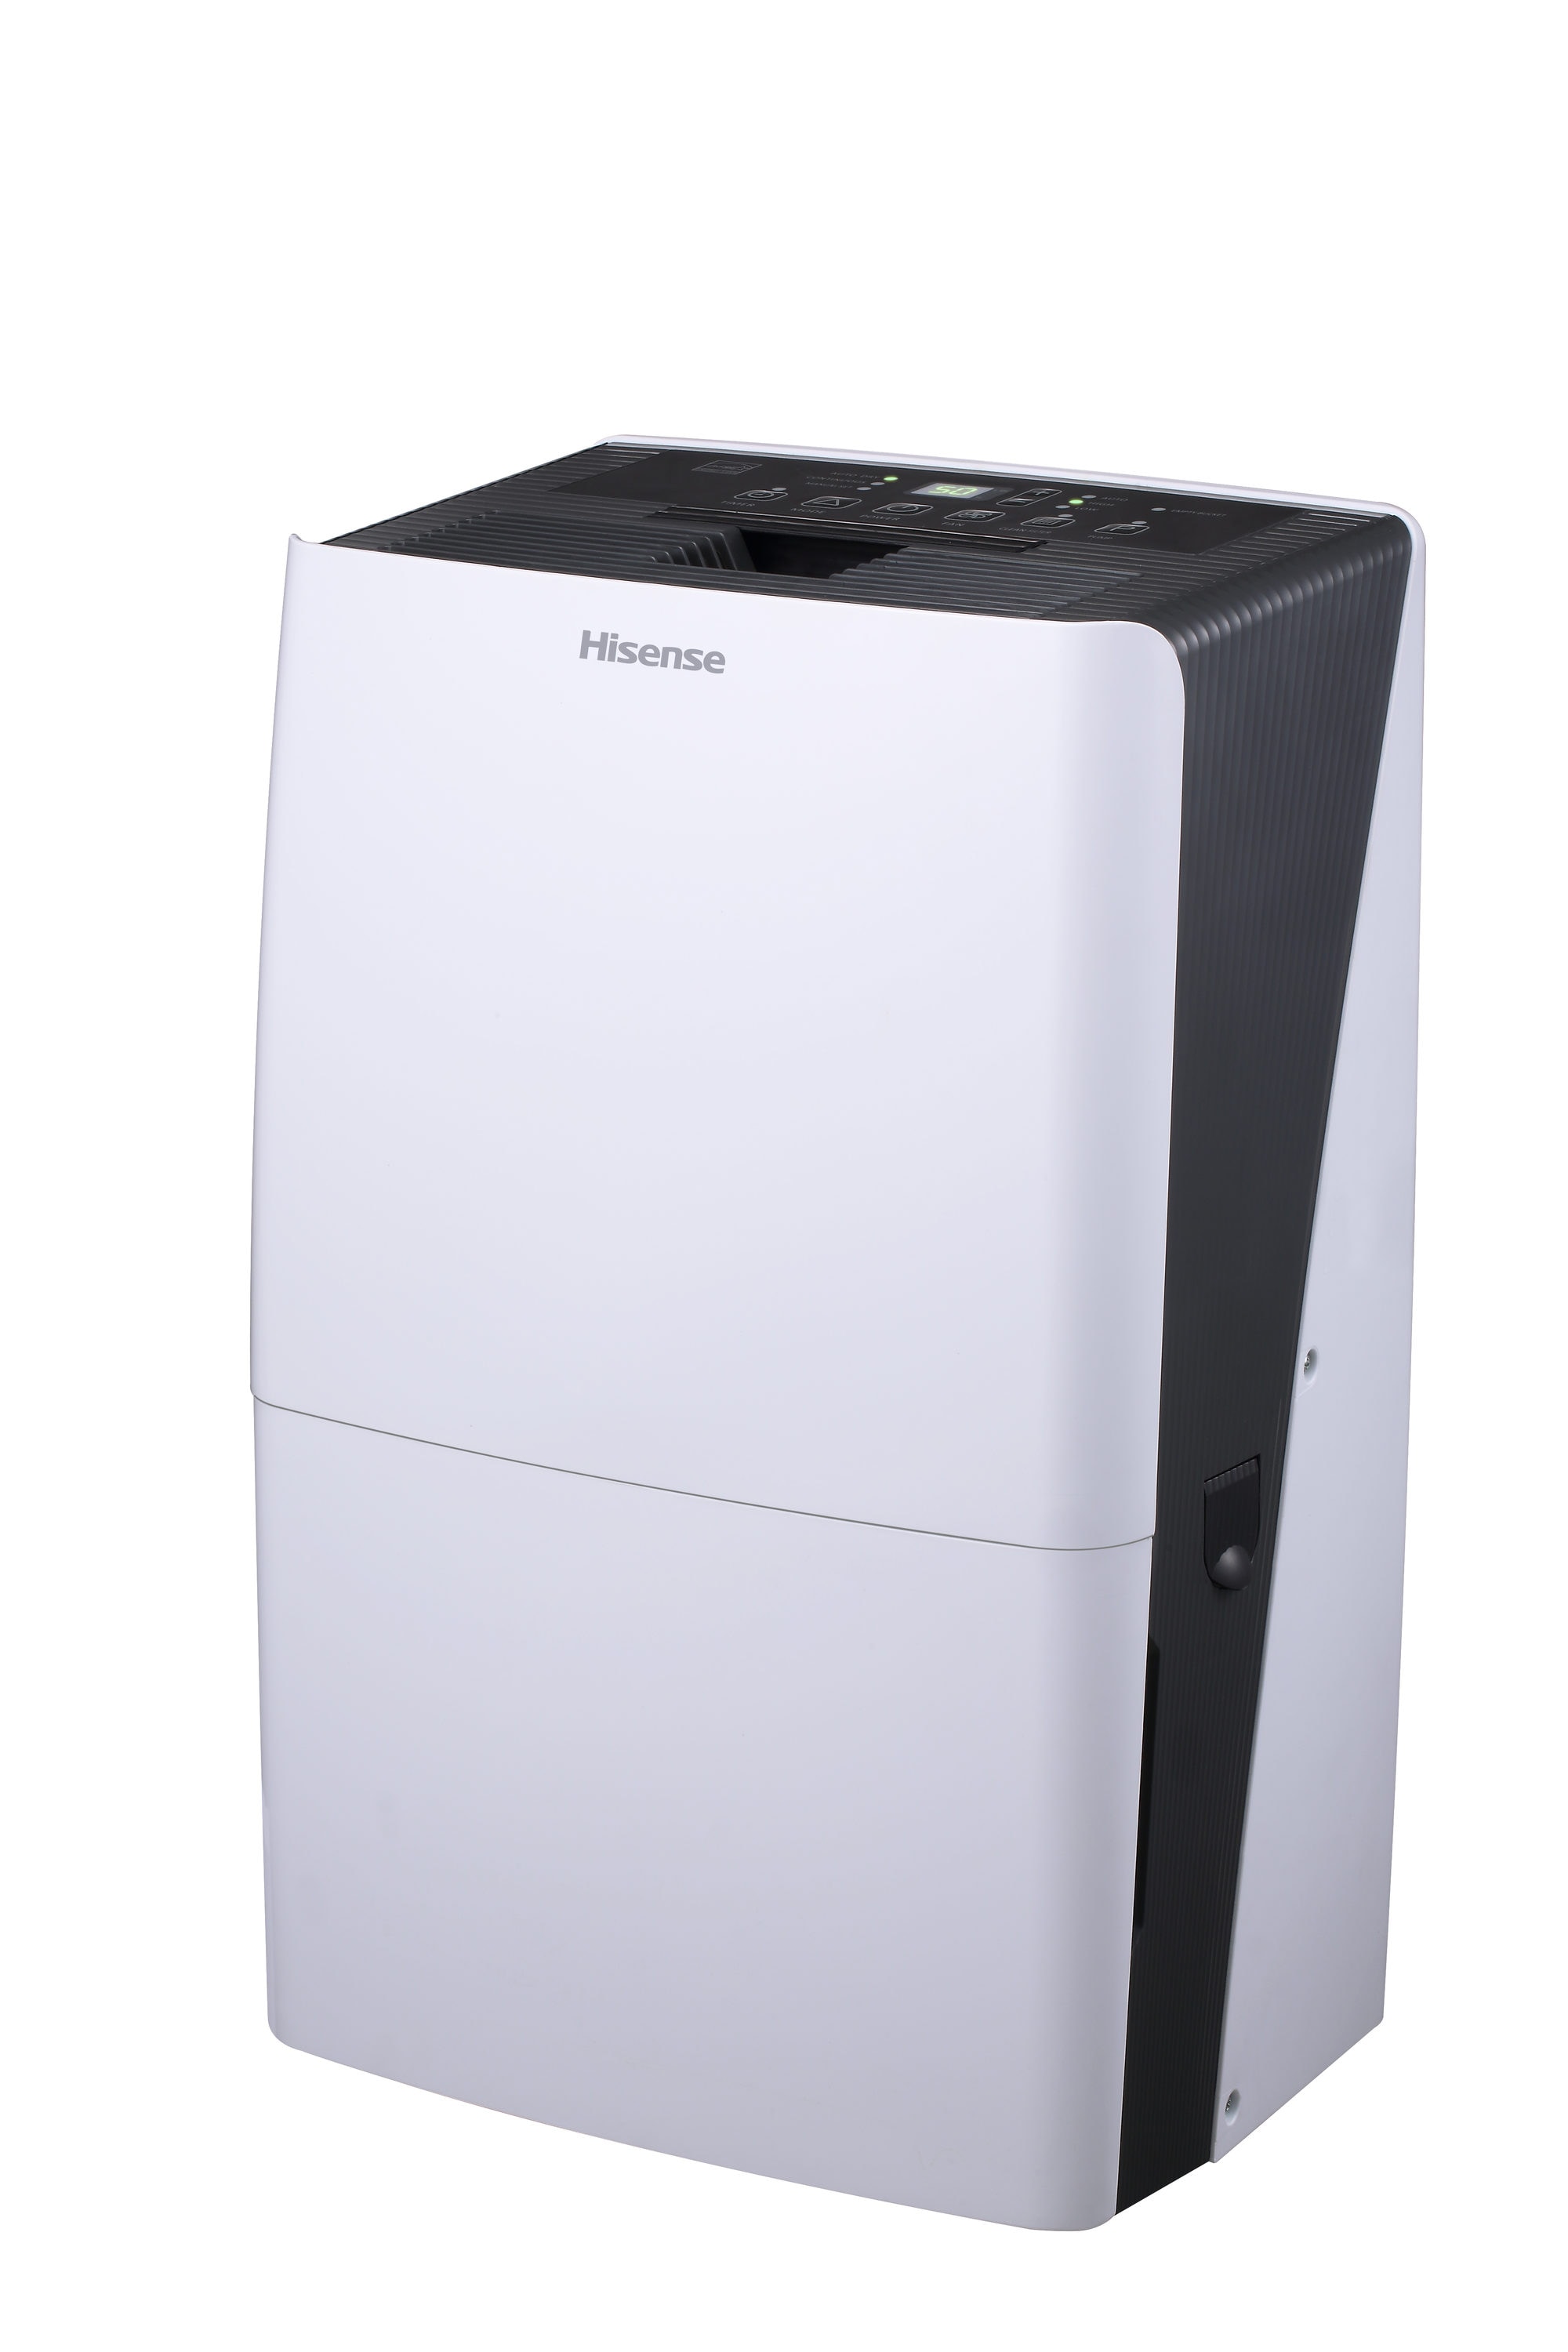 hisense-70-pint-2-speed-dehumidifier-with-built-in-pump-energy-star-in